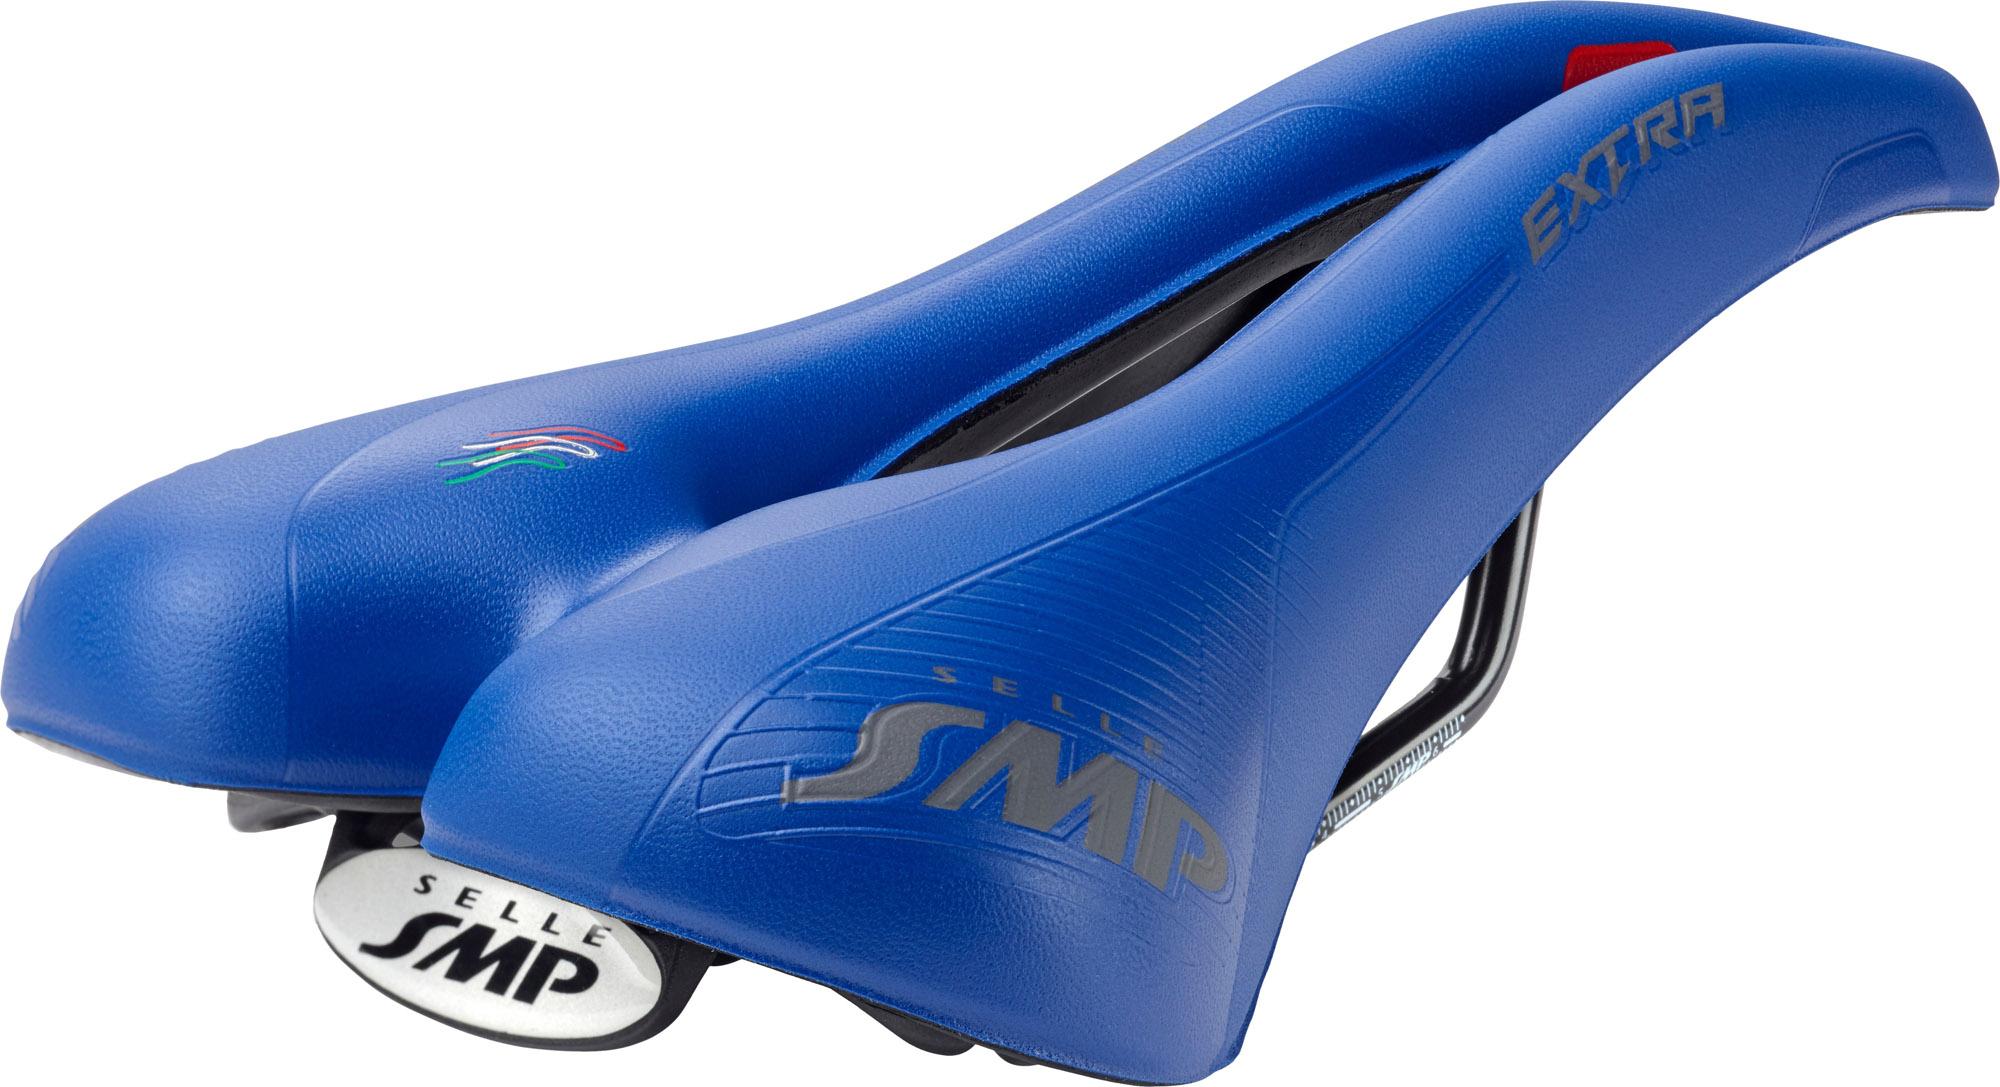 Selle Smp Extra Saddle - Blue